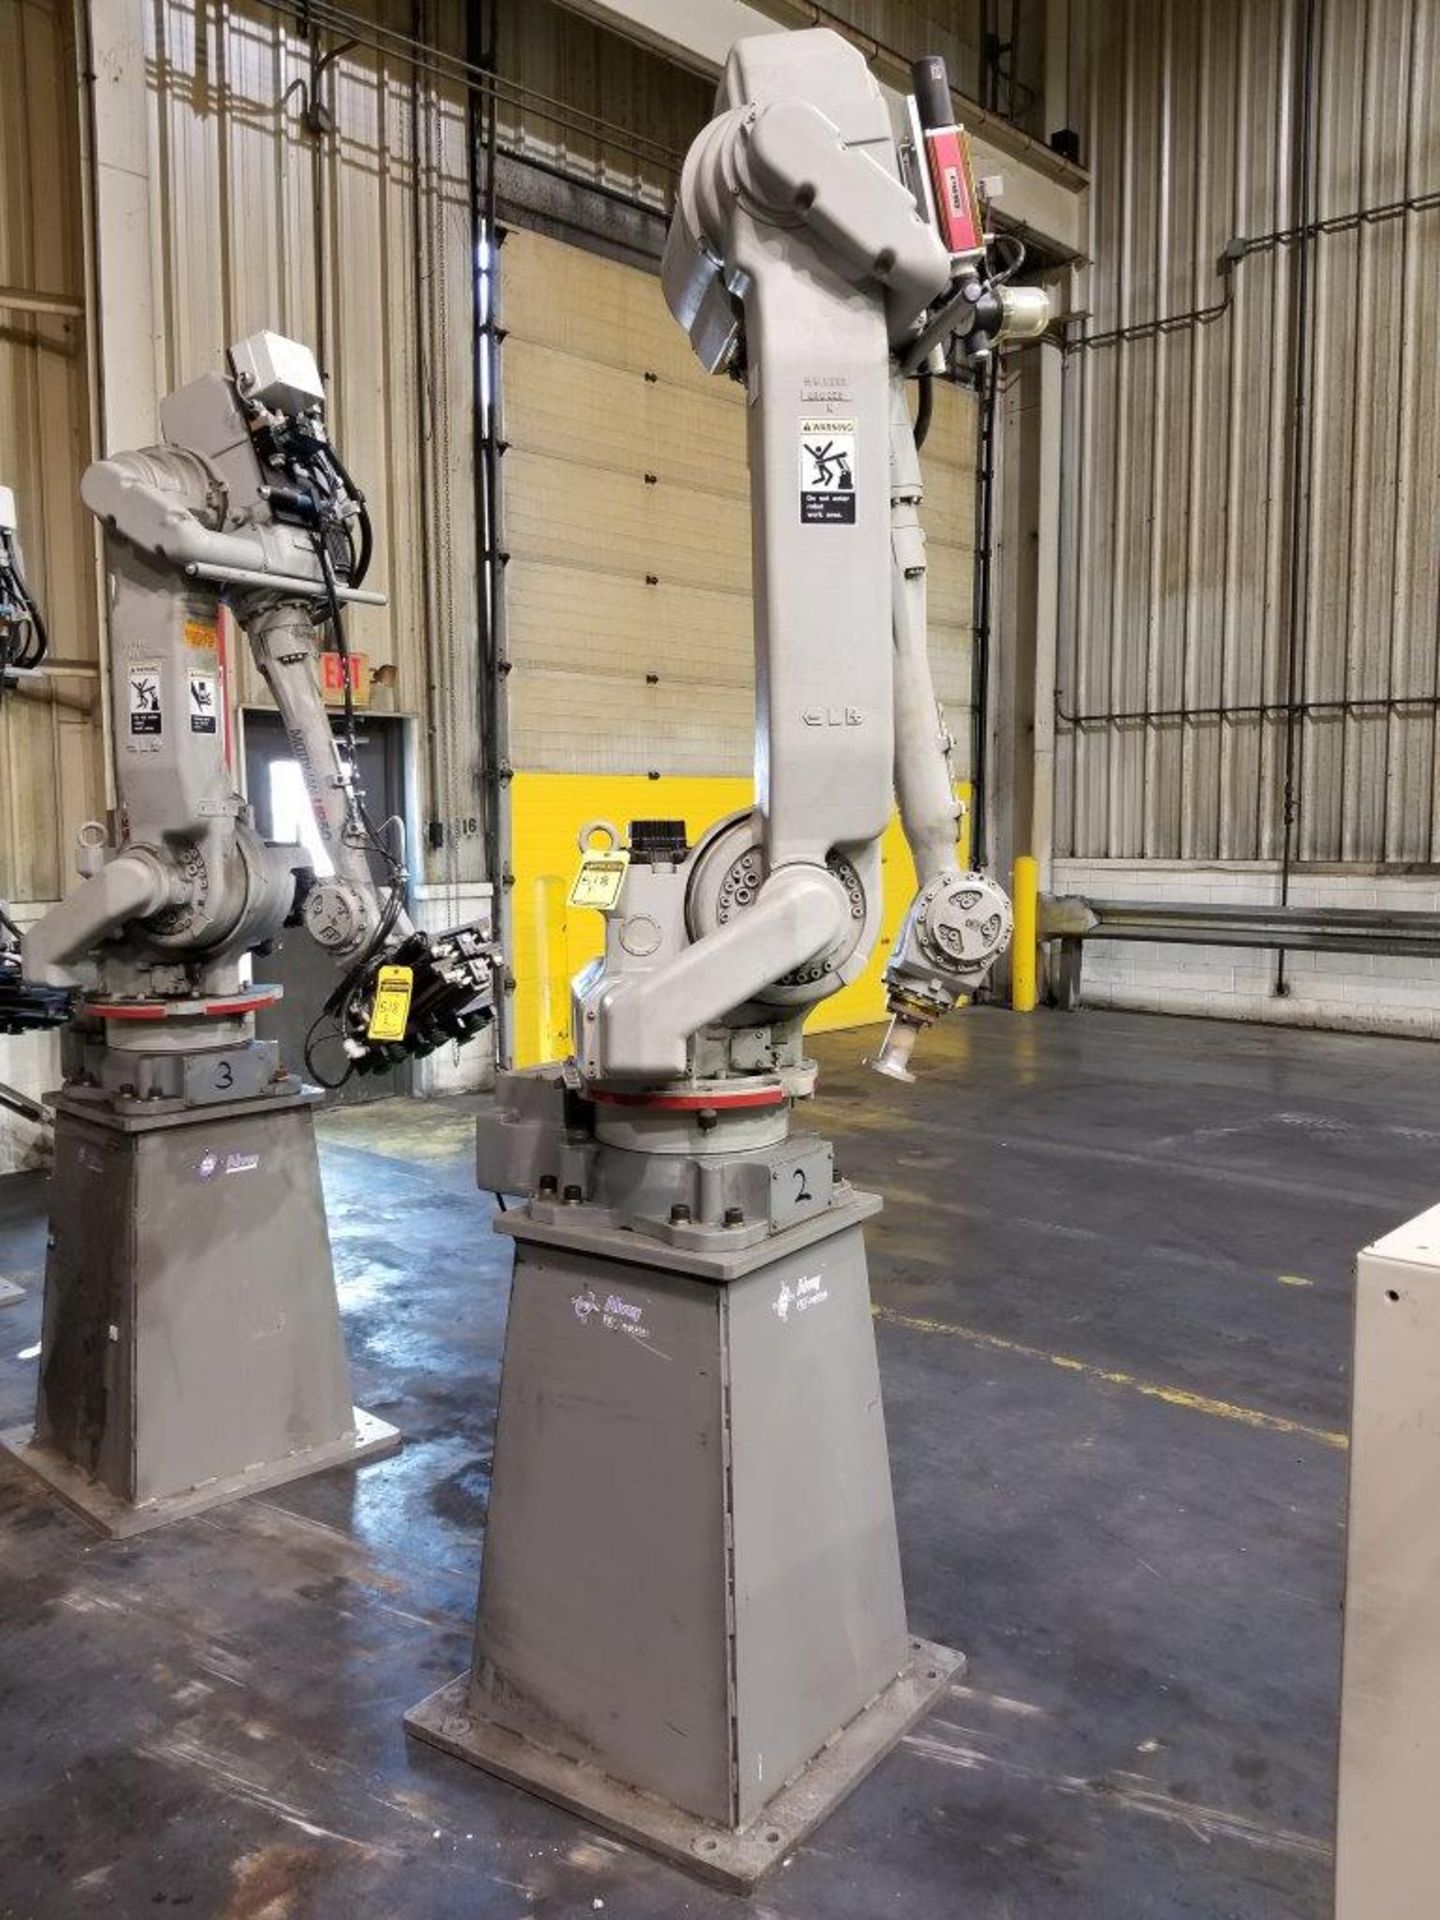 MOTOMAN UP50 ROBOT WITH ALVEX BASE; TYPE YRUP50 A02, PAYLOAD 50-MG, S/N S2K646-1-1, MASS 550-KG